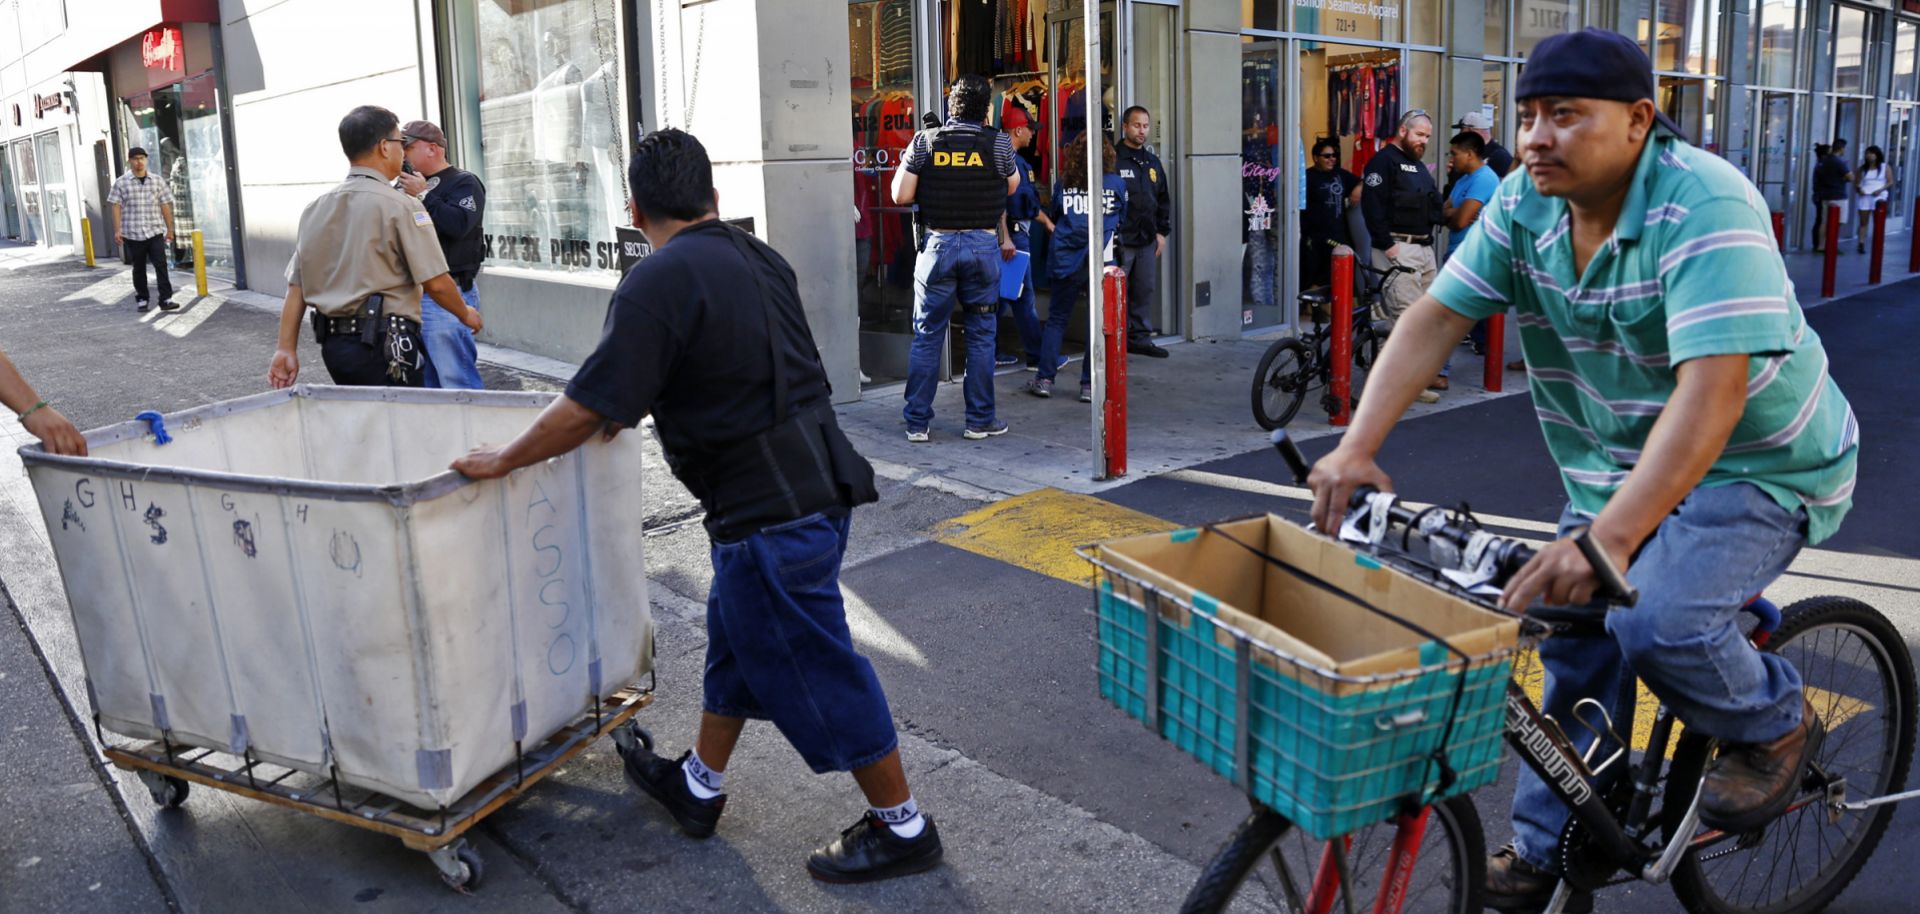 In this photo, authorities raid a fashion storefront in downtown Los Angeles on Sept. 10, 2014, as part of an investigation into the alleged laundering of narcotics profits by Mexican drug cartels.